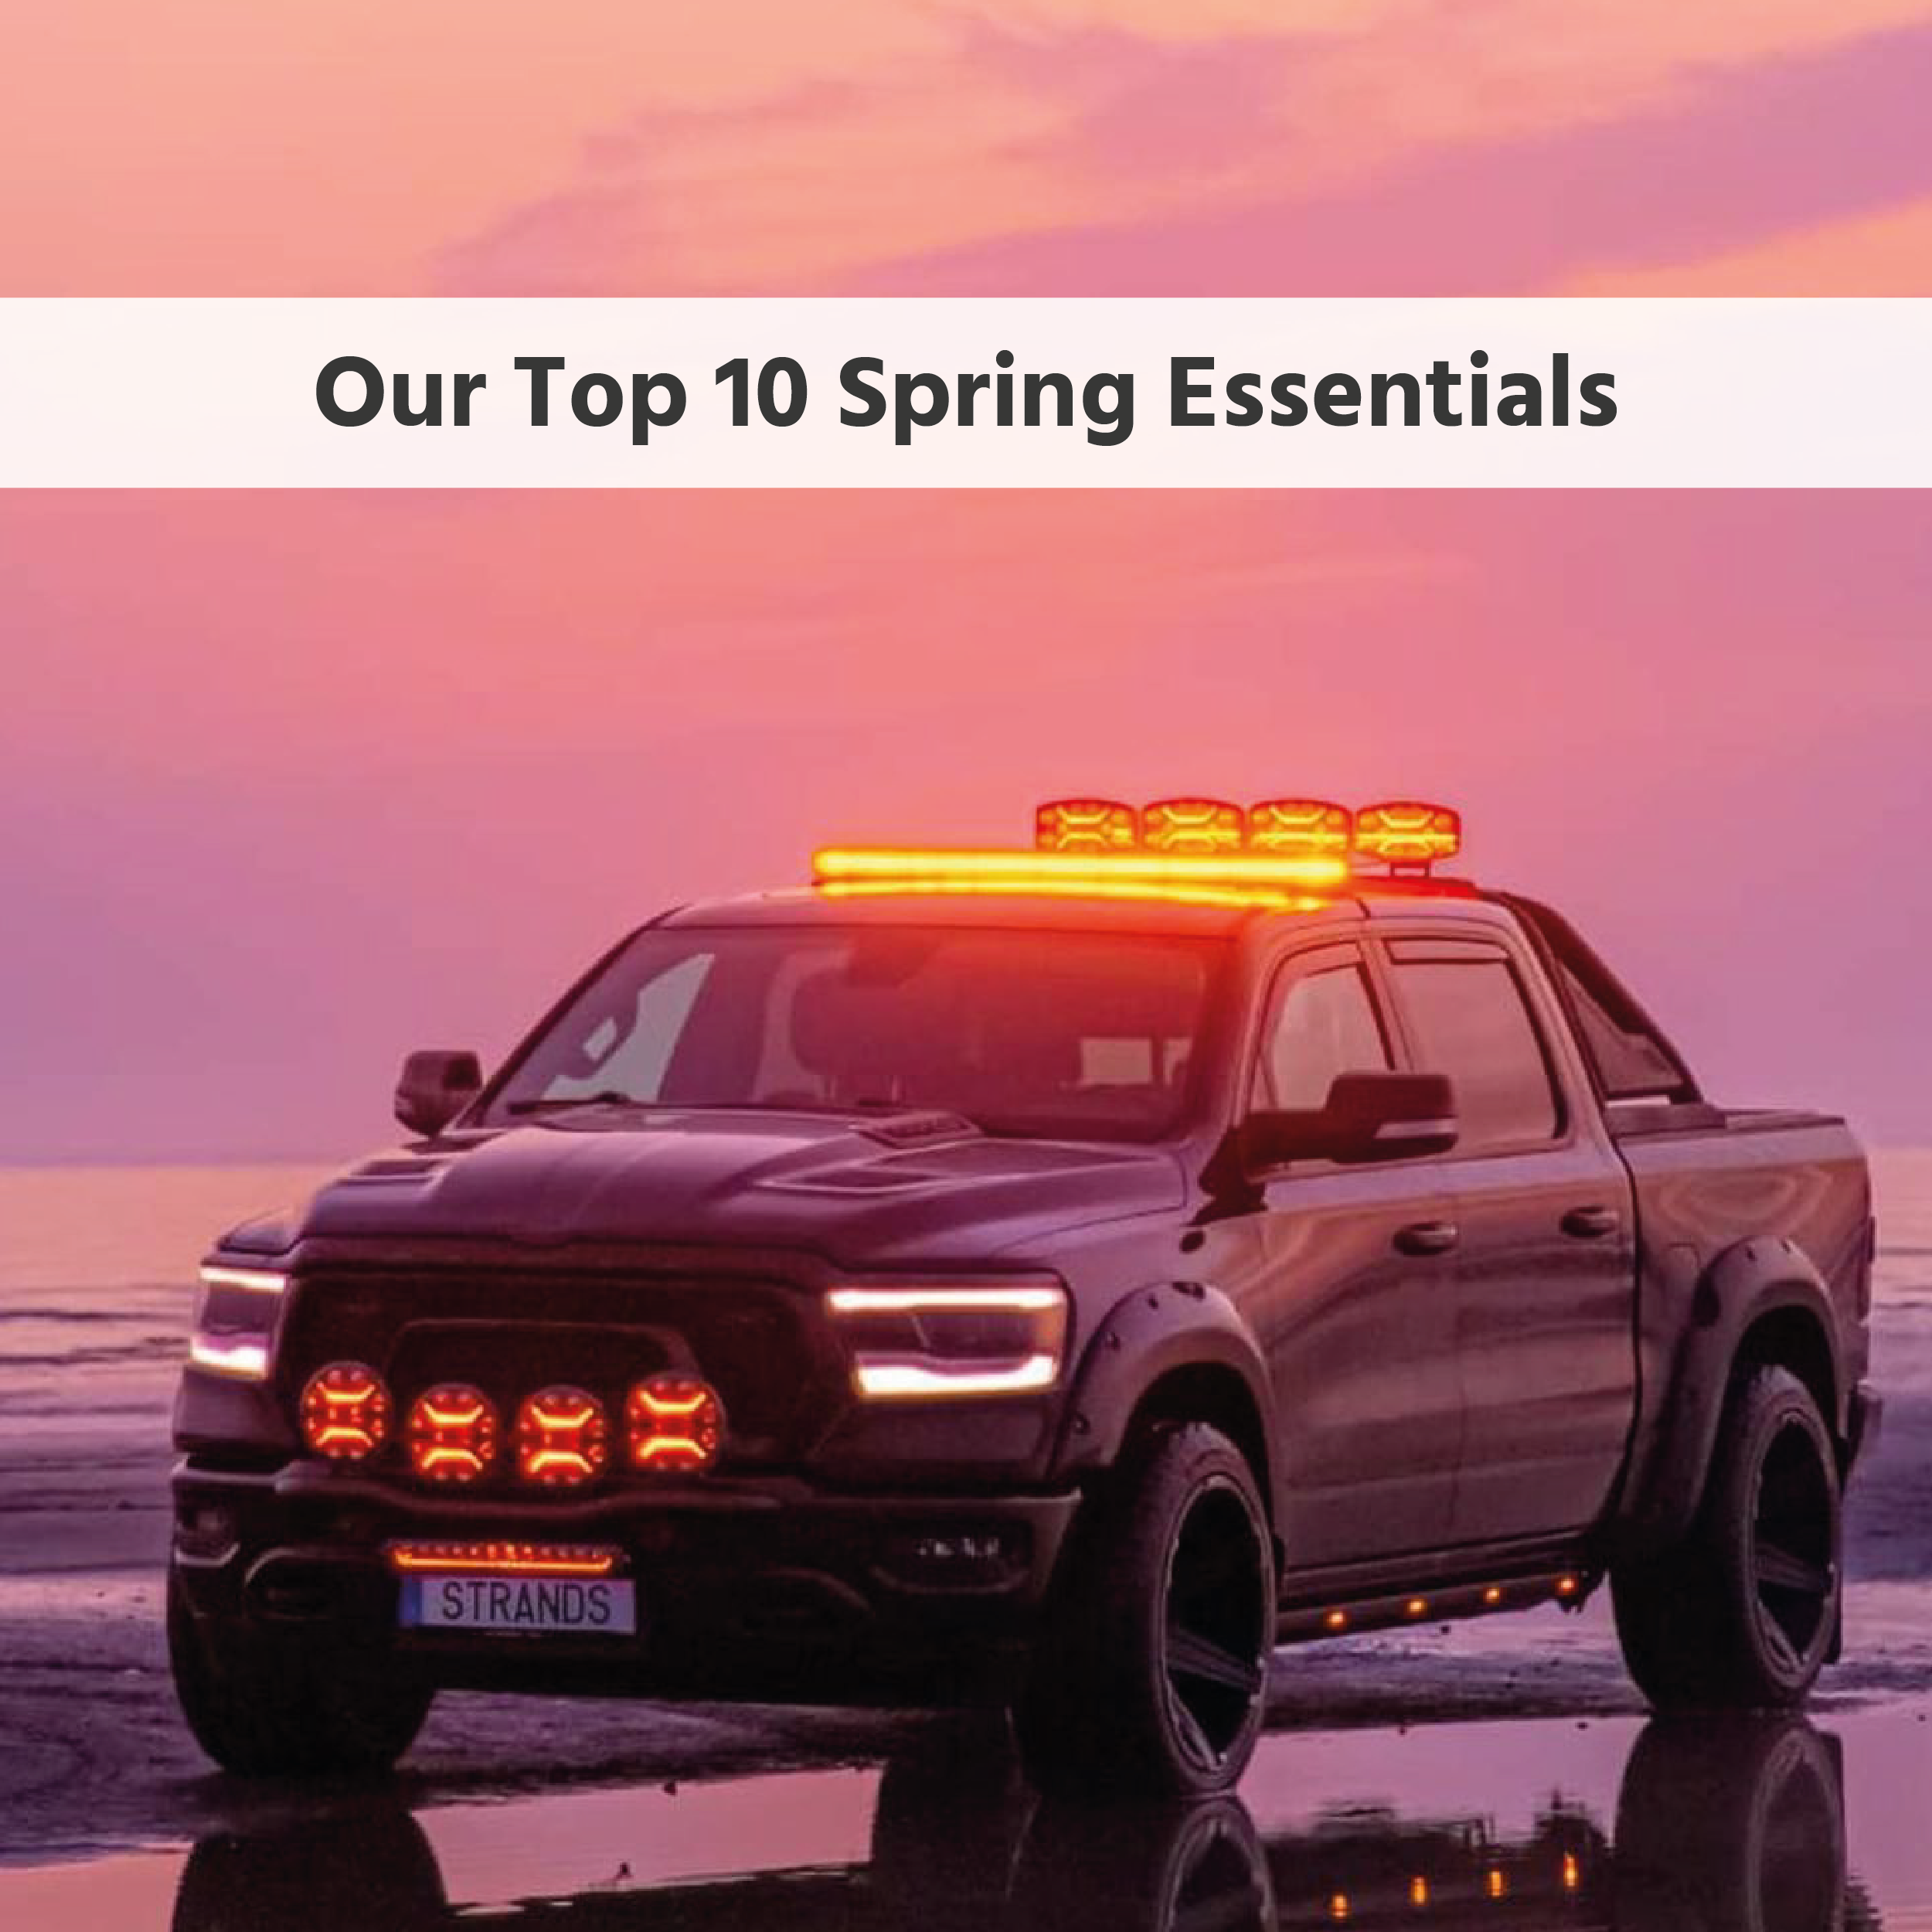 Our Top 10 Spring Essentials